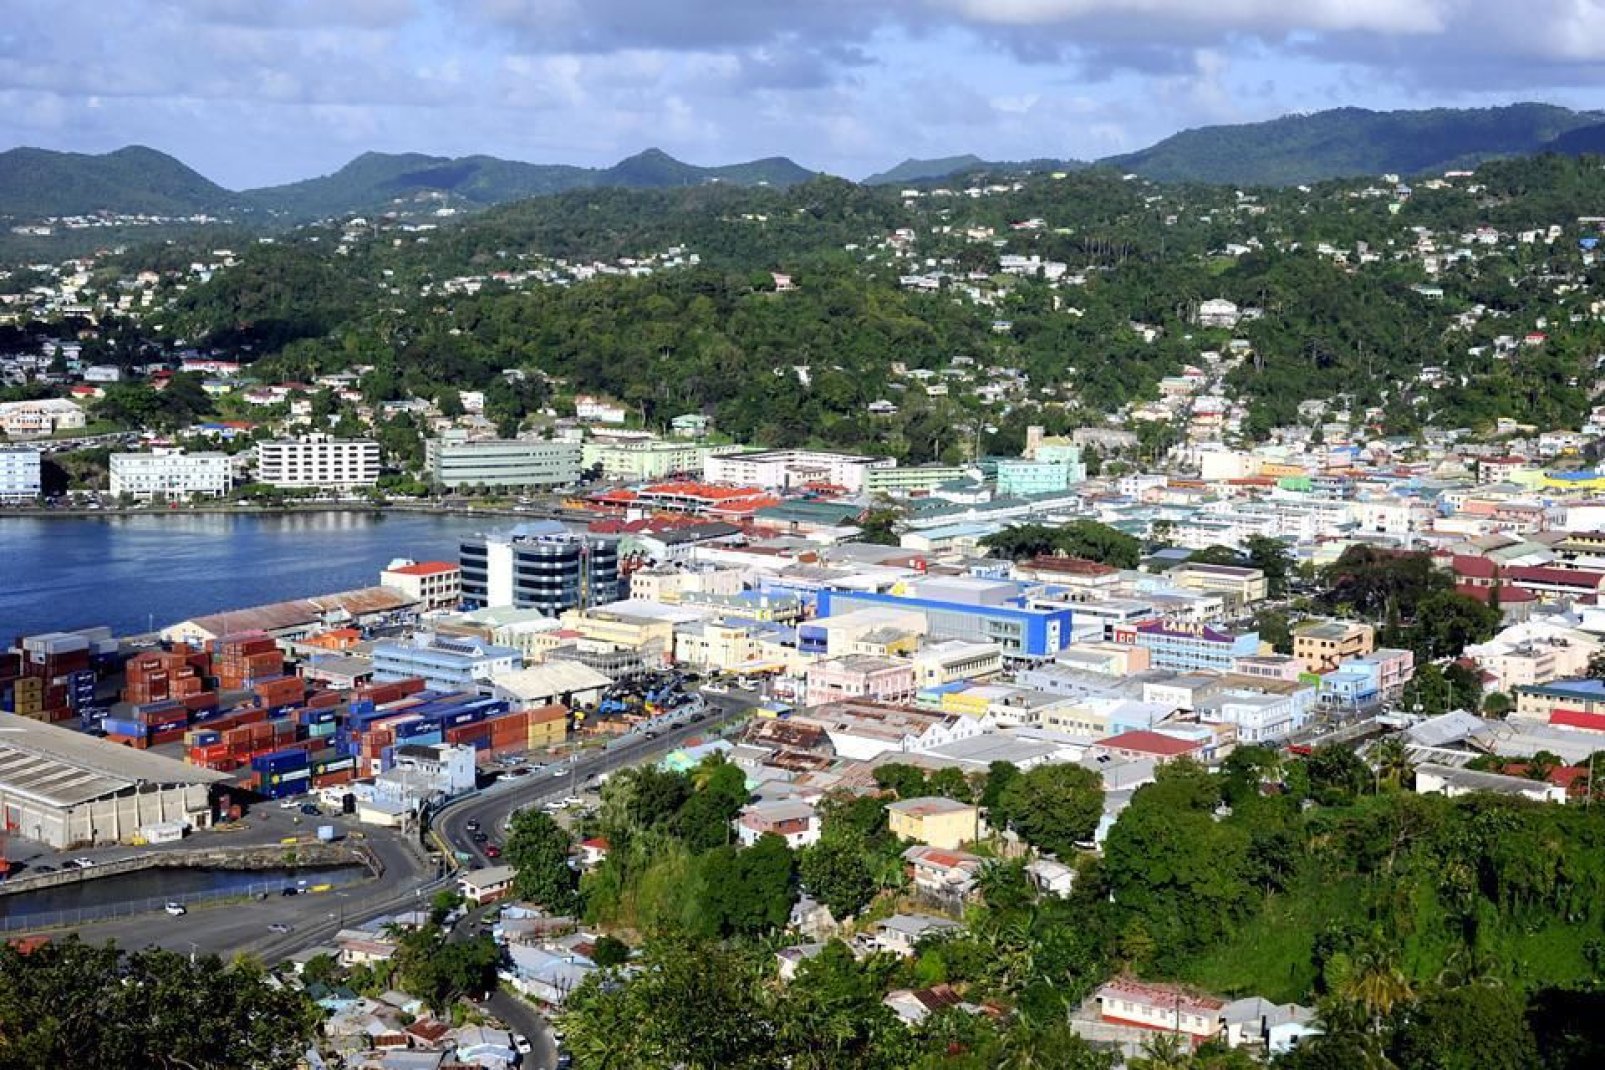 The political and economic capital of St. Lucia is home to some 65,000 inhabitants.